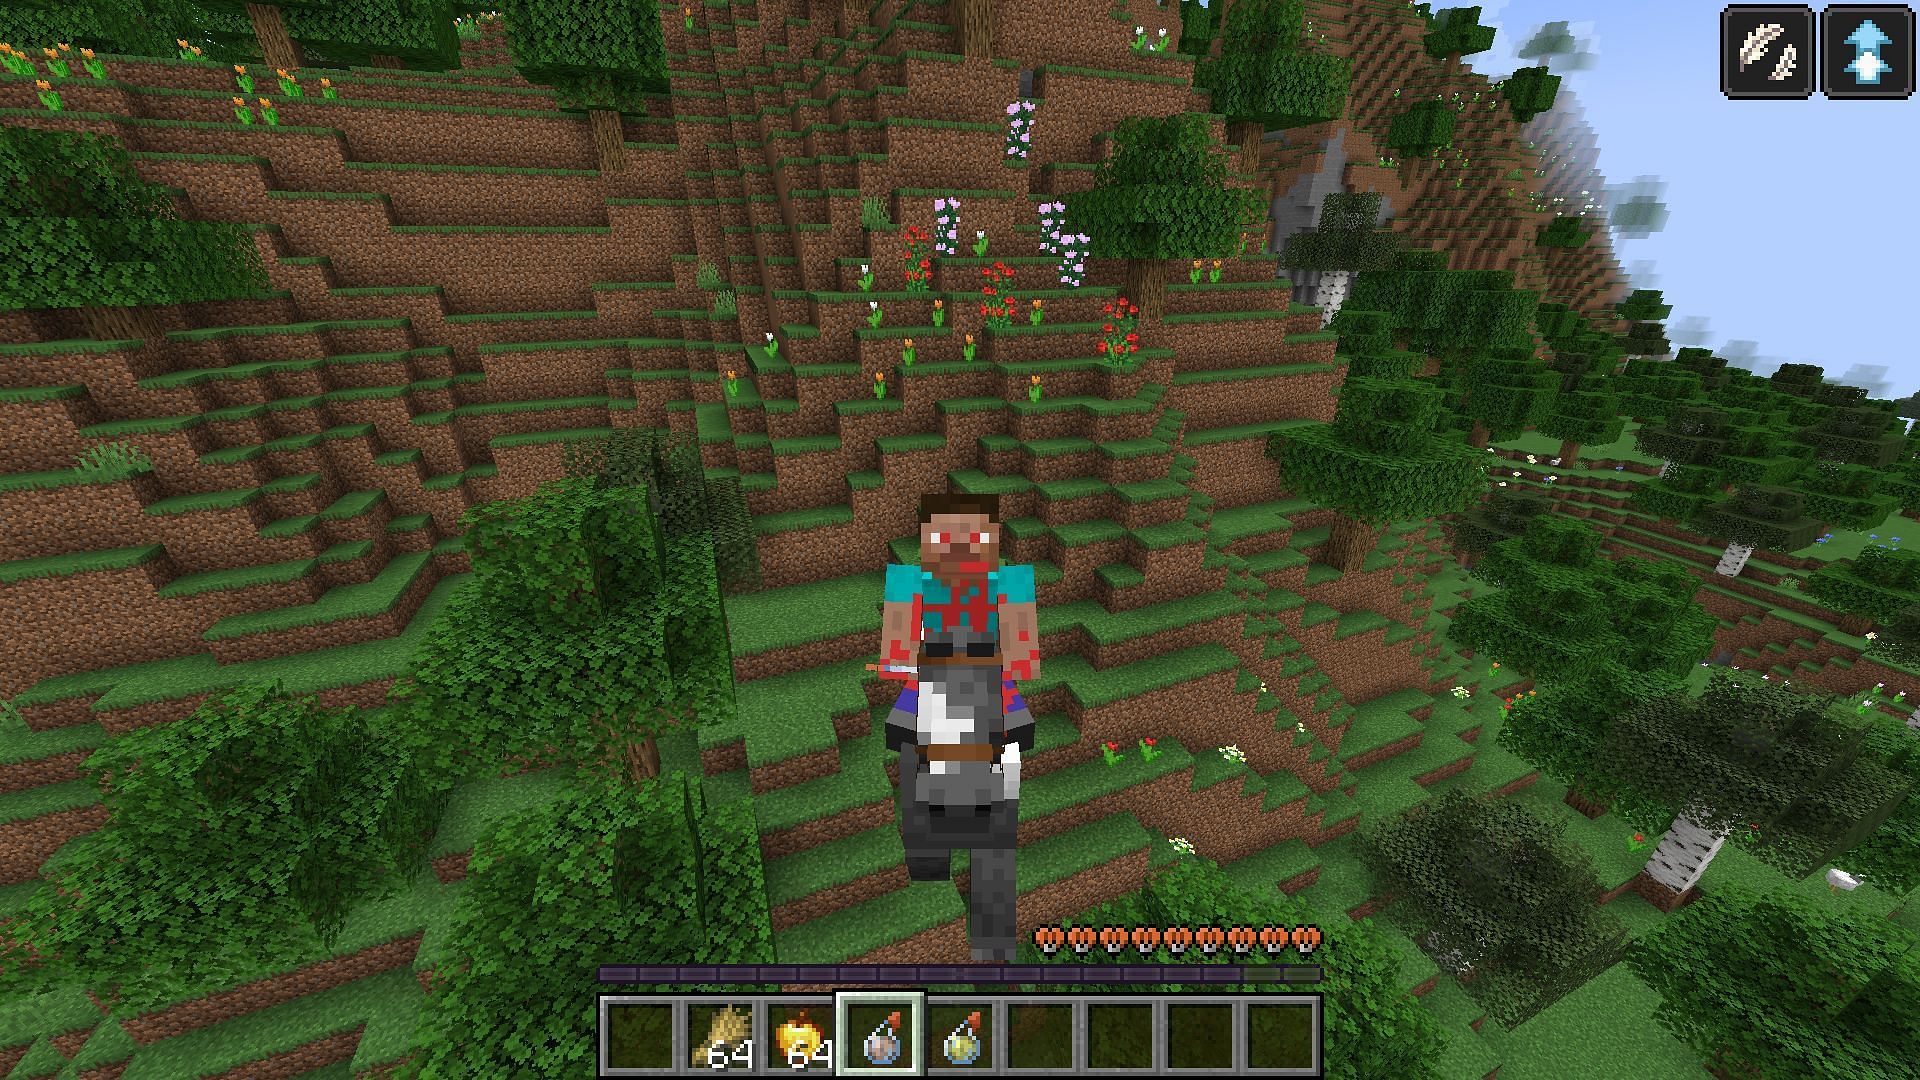 Slow falling and jump boost status effects now apply to ridable mobs in Minecraft 1.20 update (Image via Mojang)